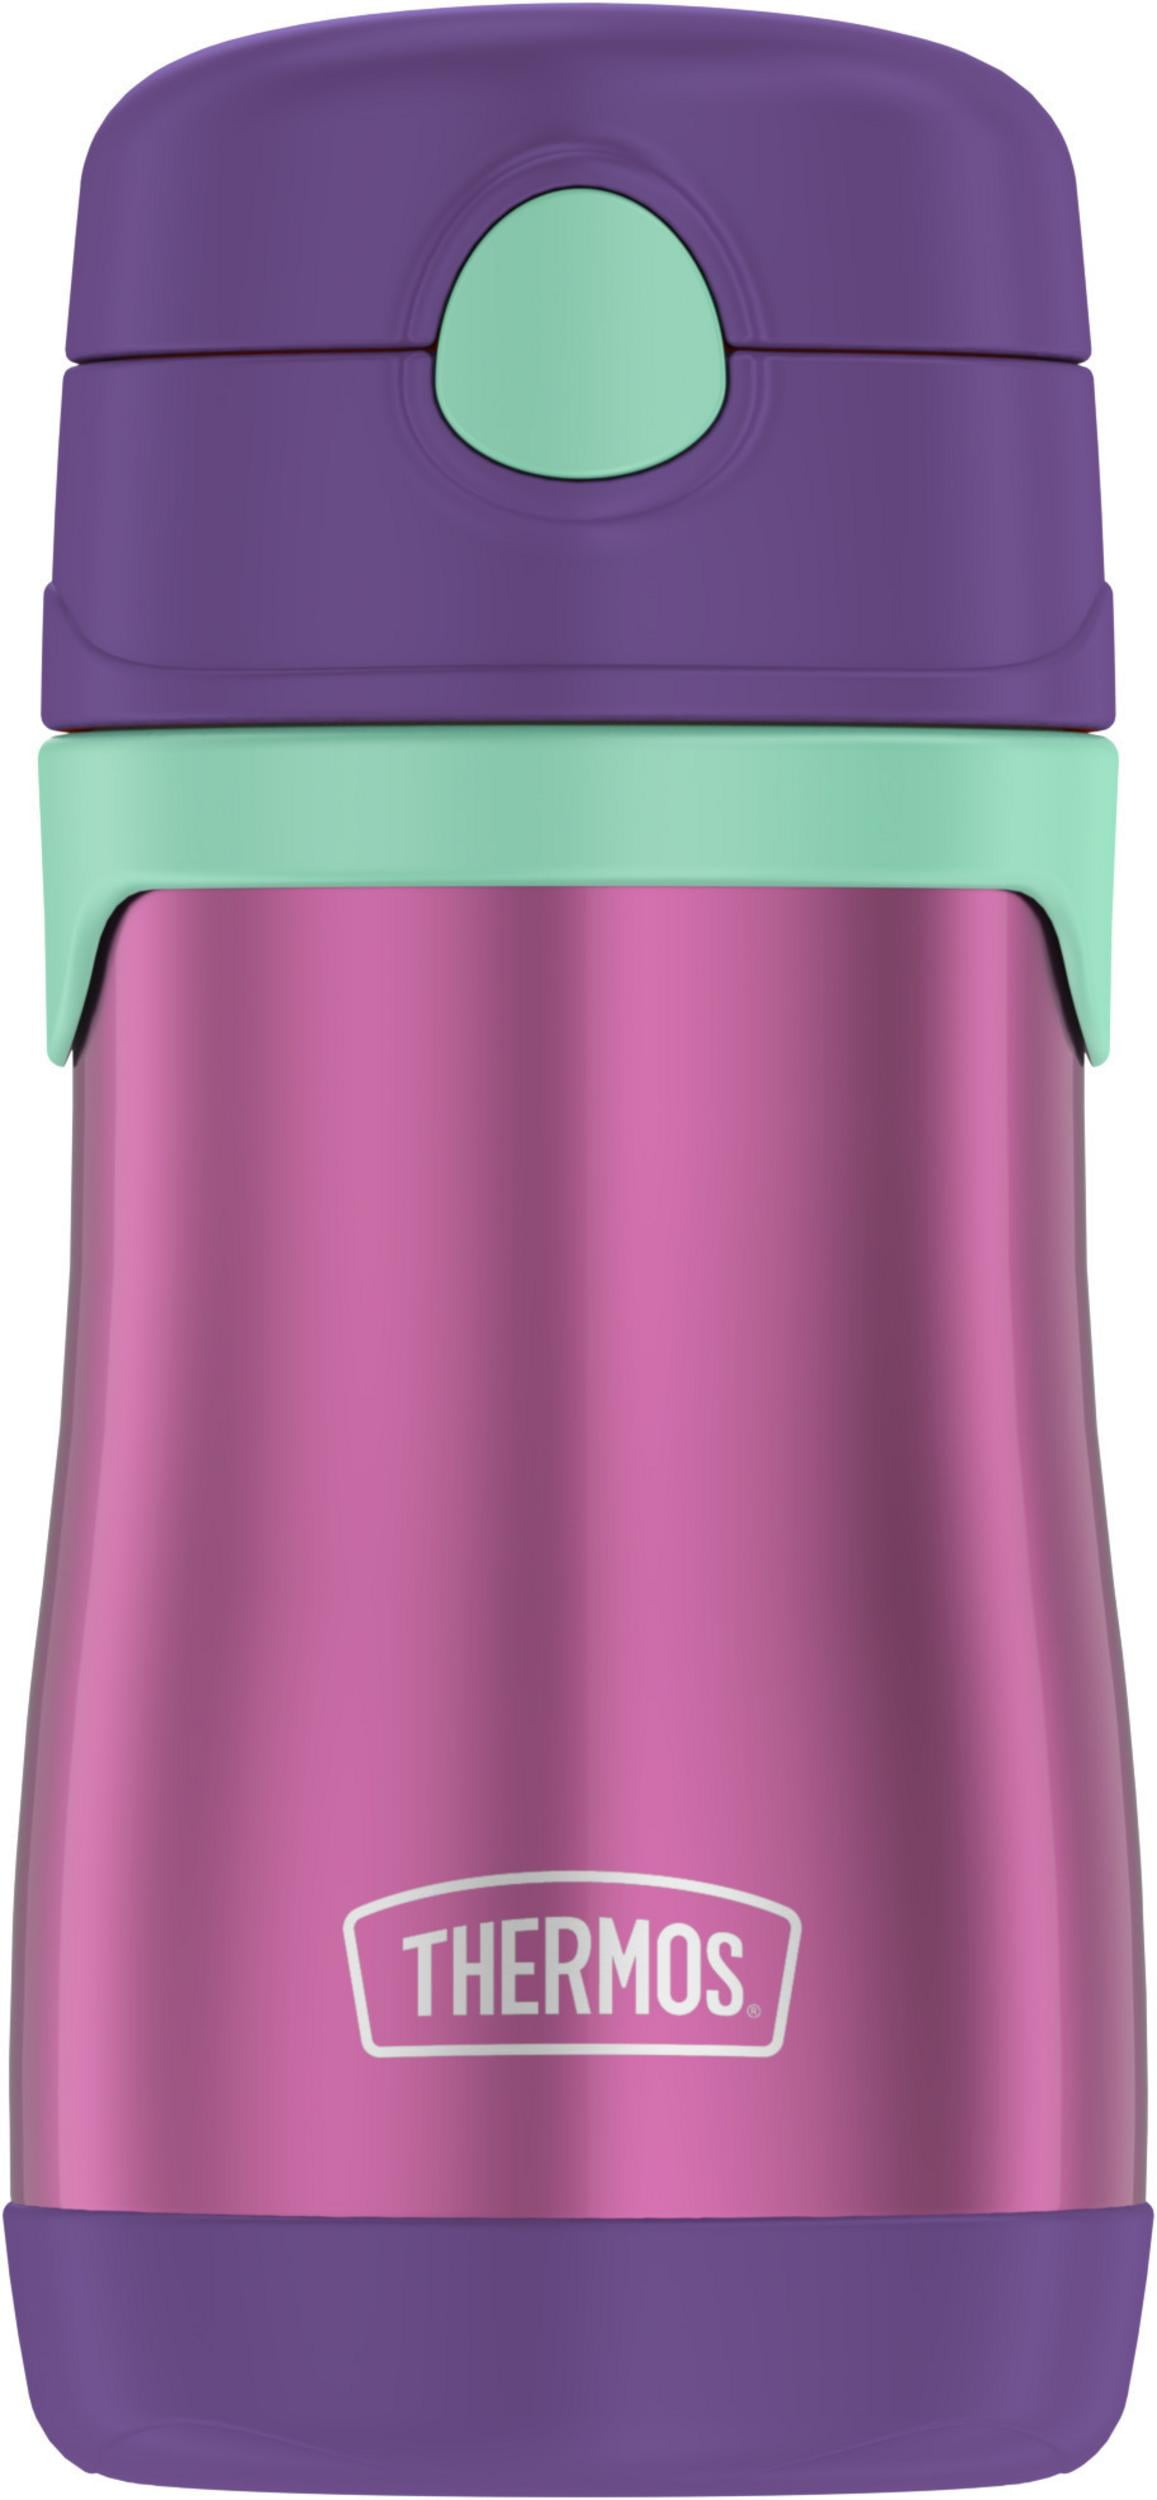 Thermos Baby 10 Oz. Simple Pastels Insulated Stainless Steel Sippy